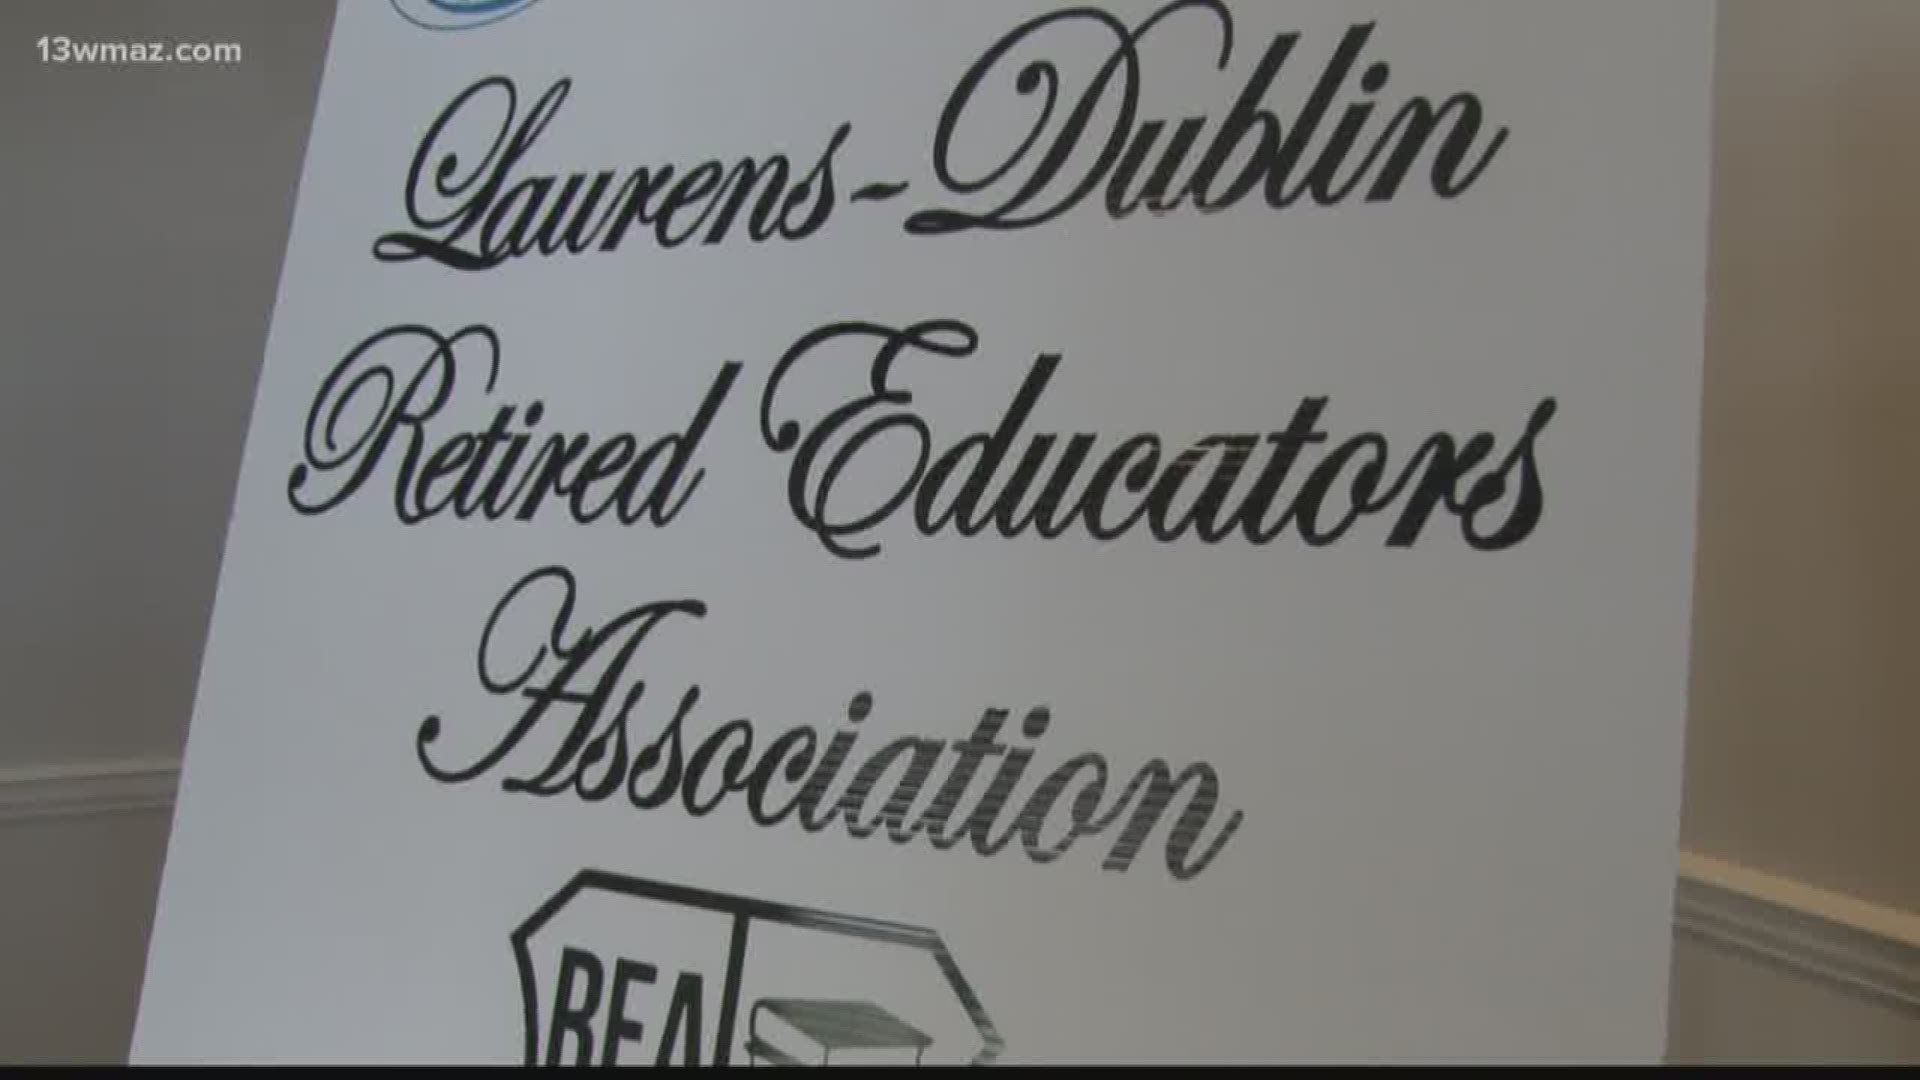 Mildred Lord and Lillie Hobbs are two women who took different paths that led them to the same goal: educating the minds of children in the Dublin and Laurens County community. Wednesday, they were honored along with other retired educators in Dublin City Schools and Laurens County.